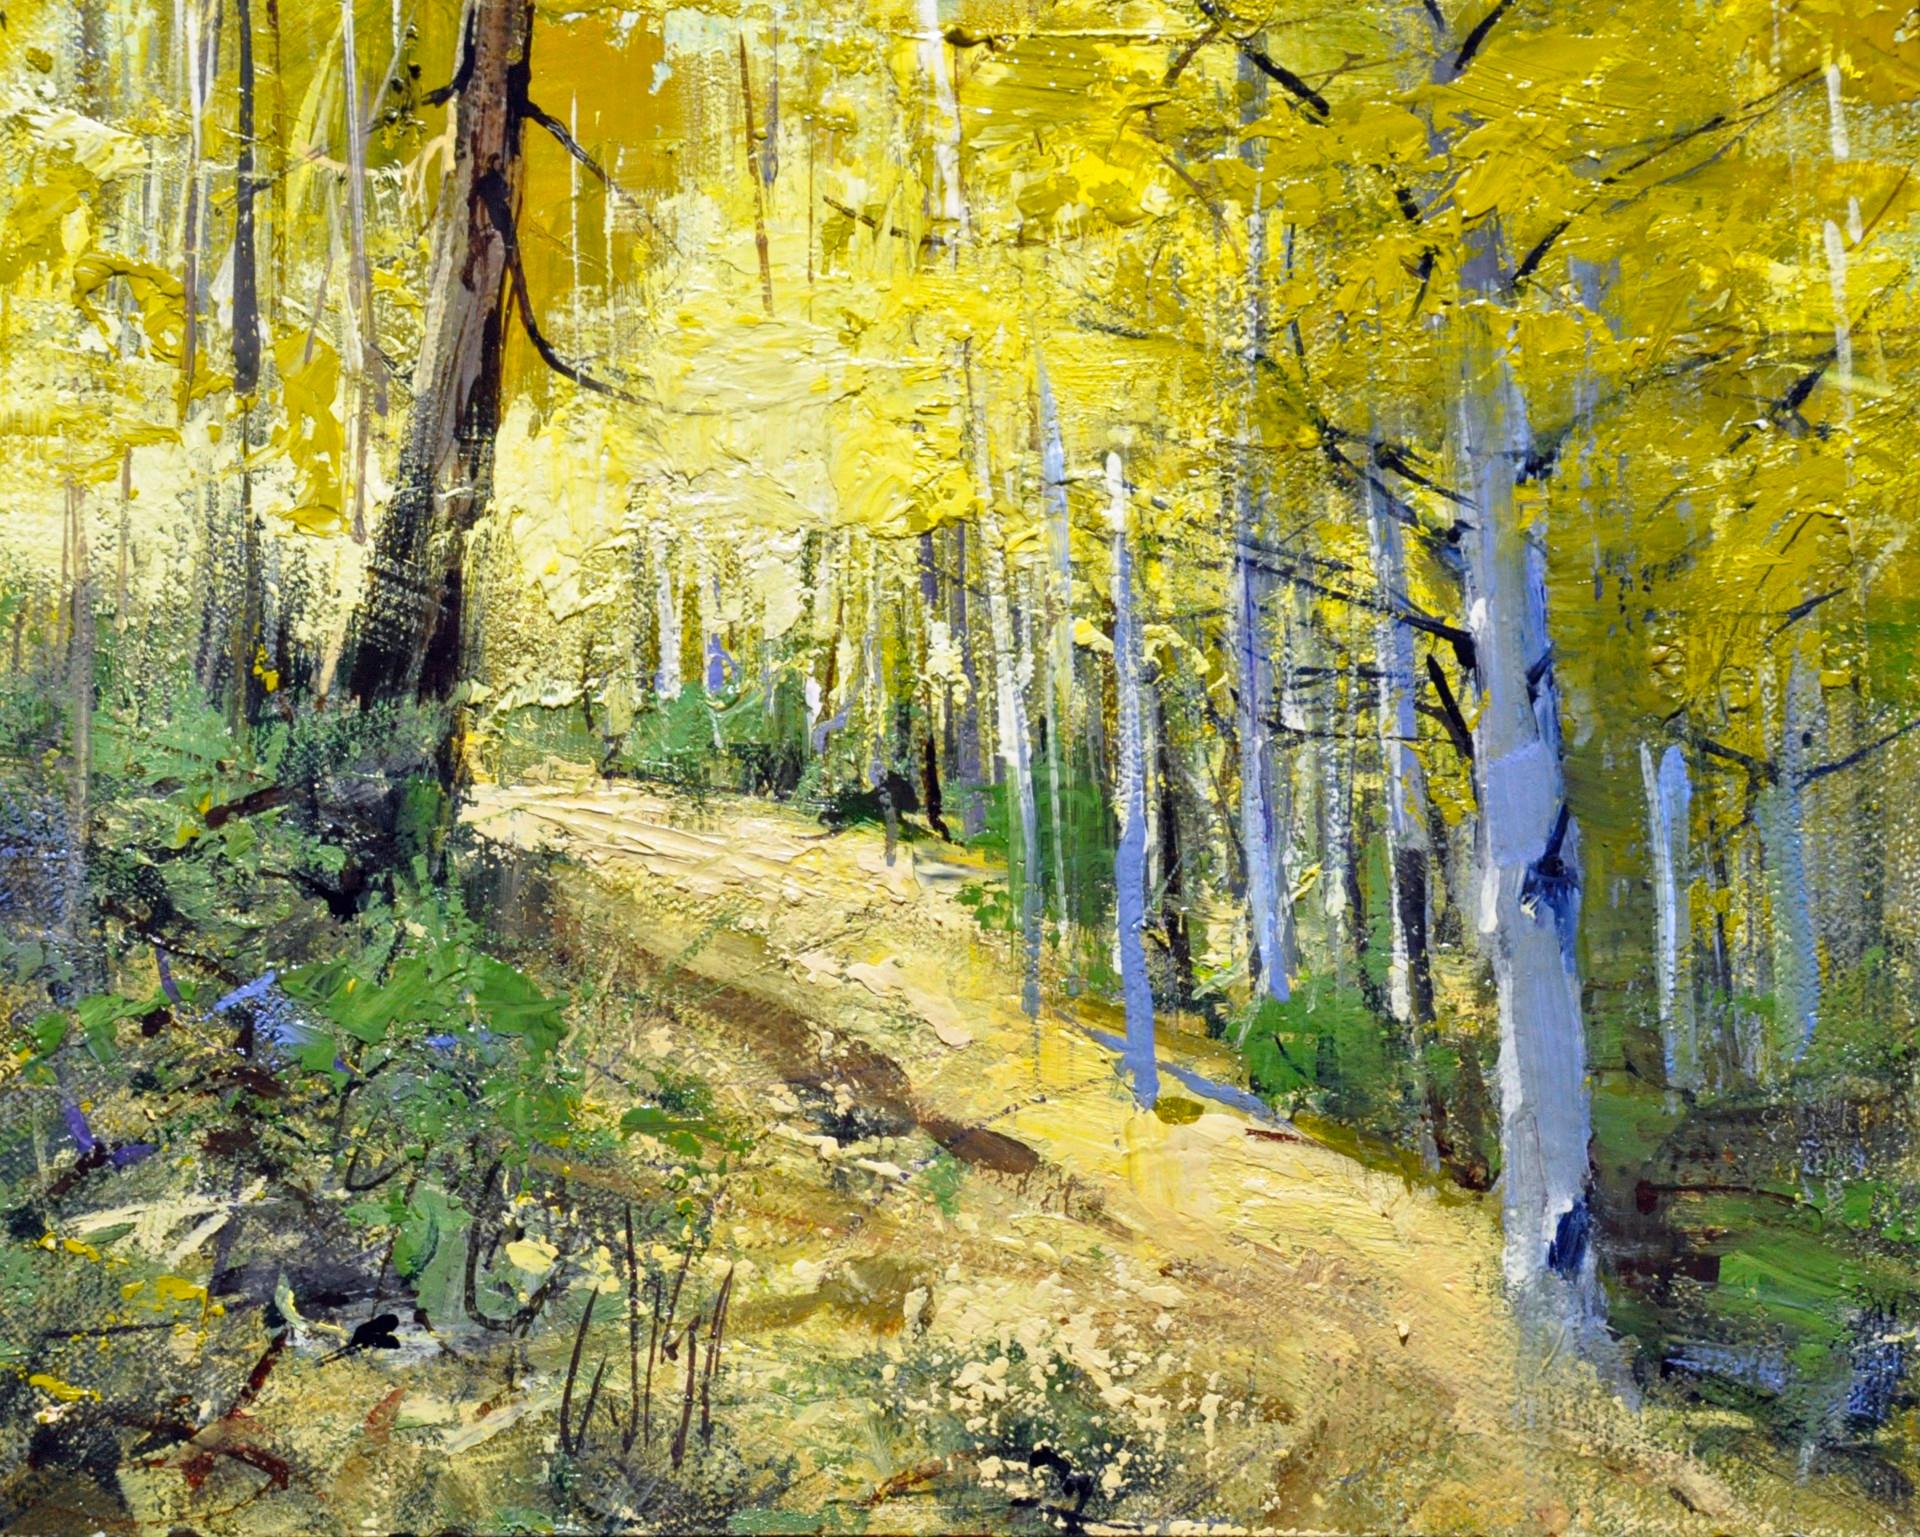 Yellow Woods III - Art by Mike Wise